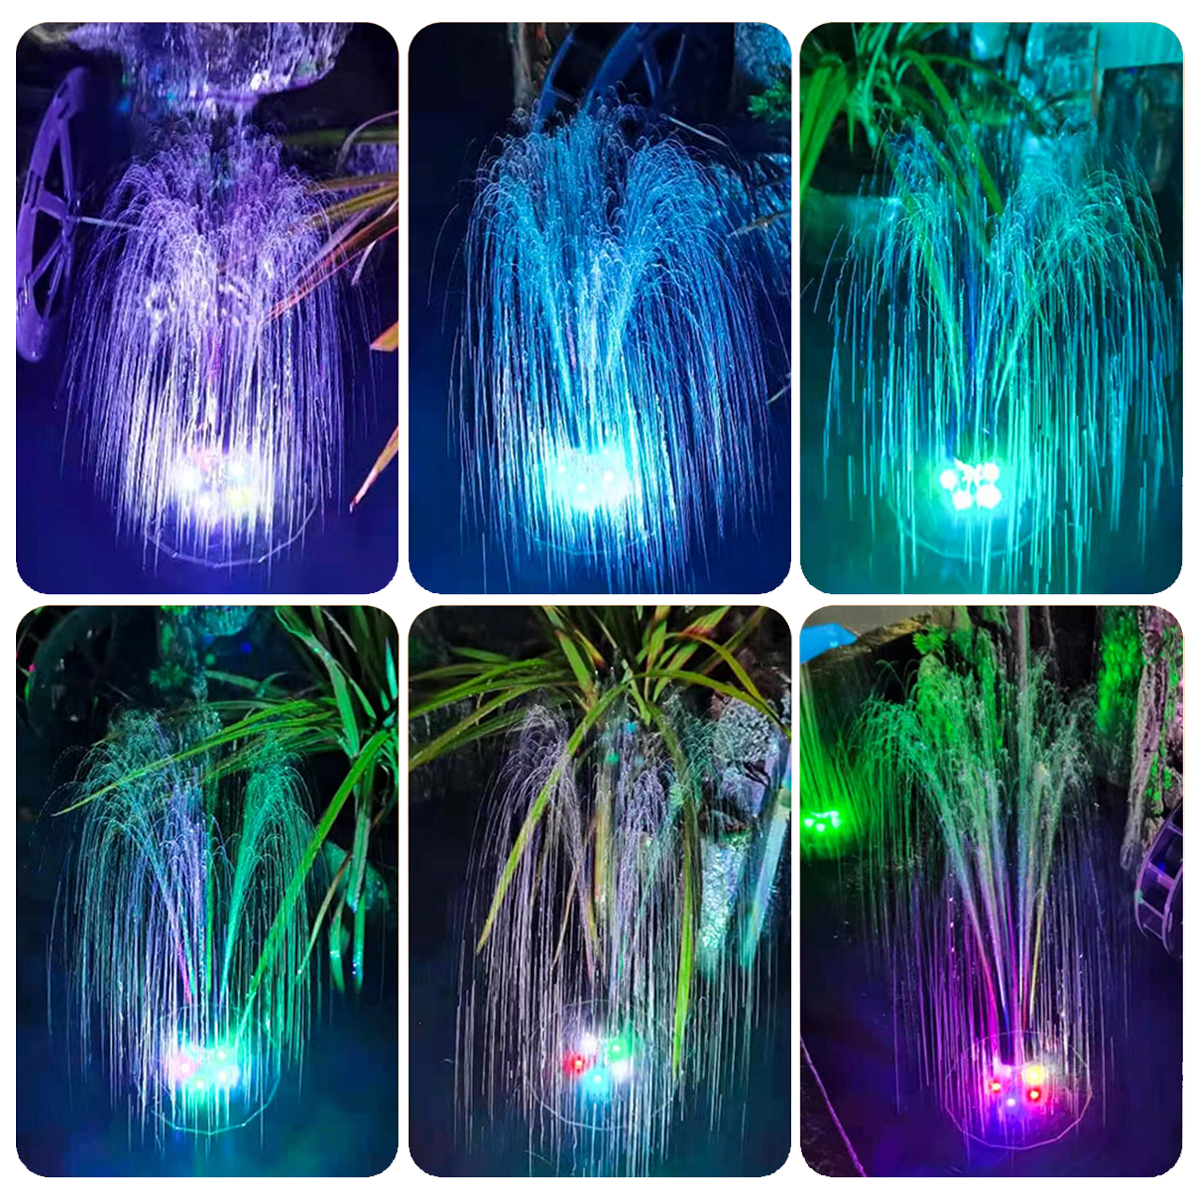 RGB-LED-Solar-Powered-Fountain-Pump-W-6-Nozzles-Water-Pump-Night-Floating-Garden-1879317-9